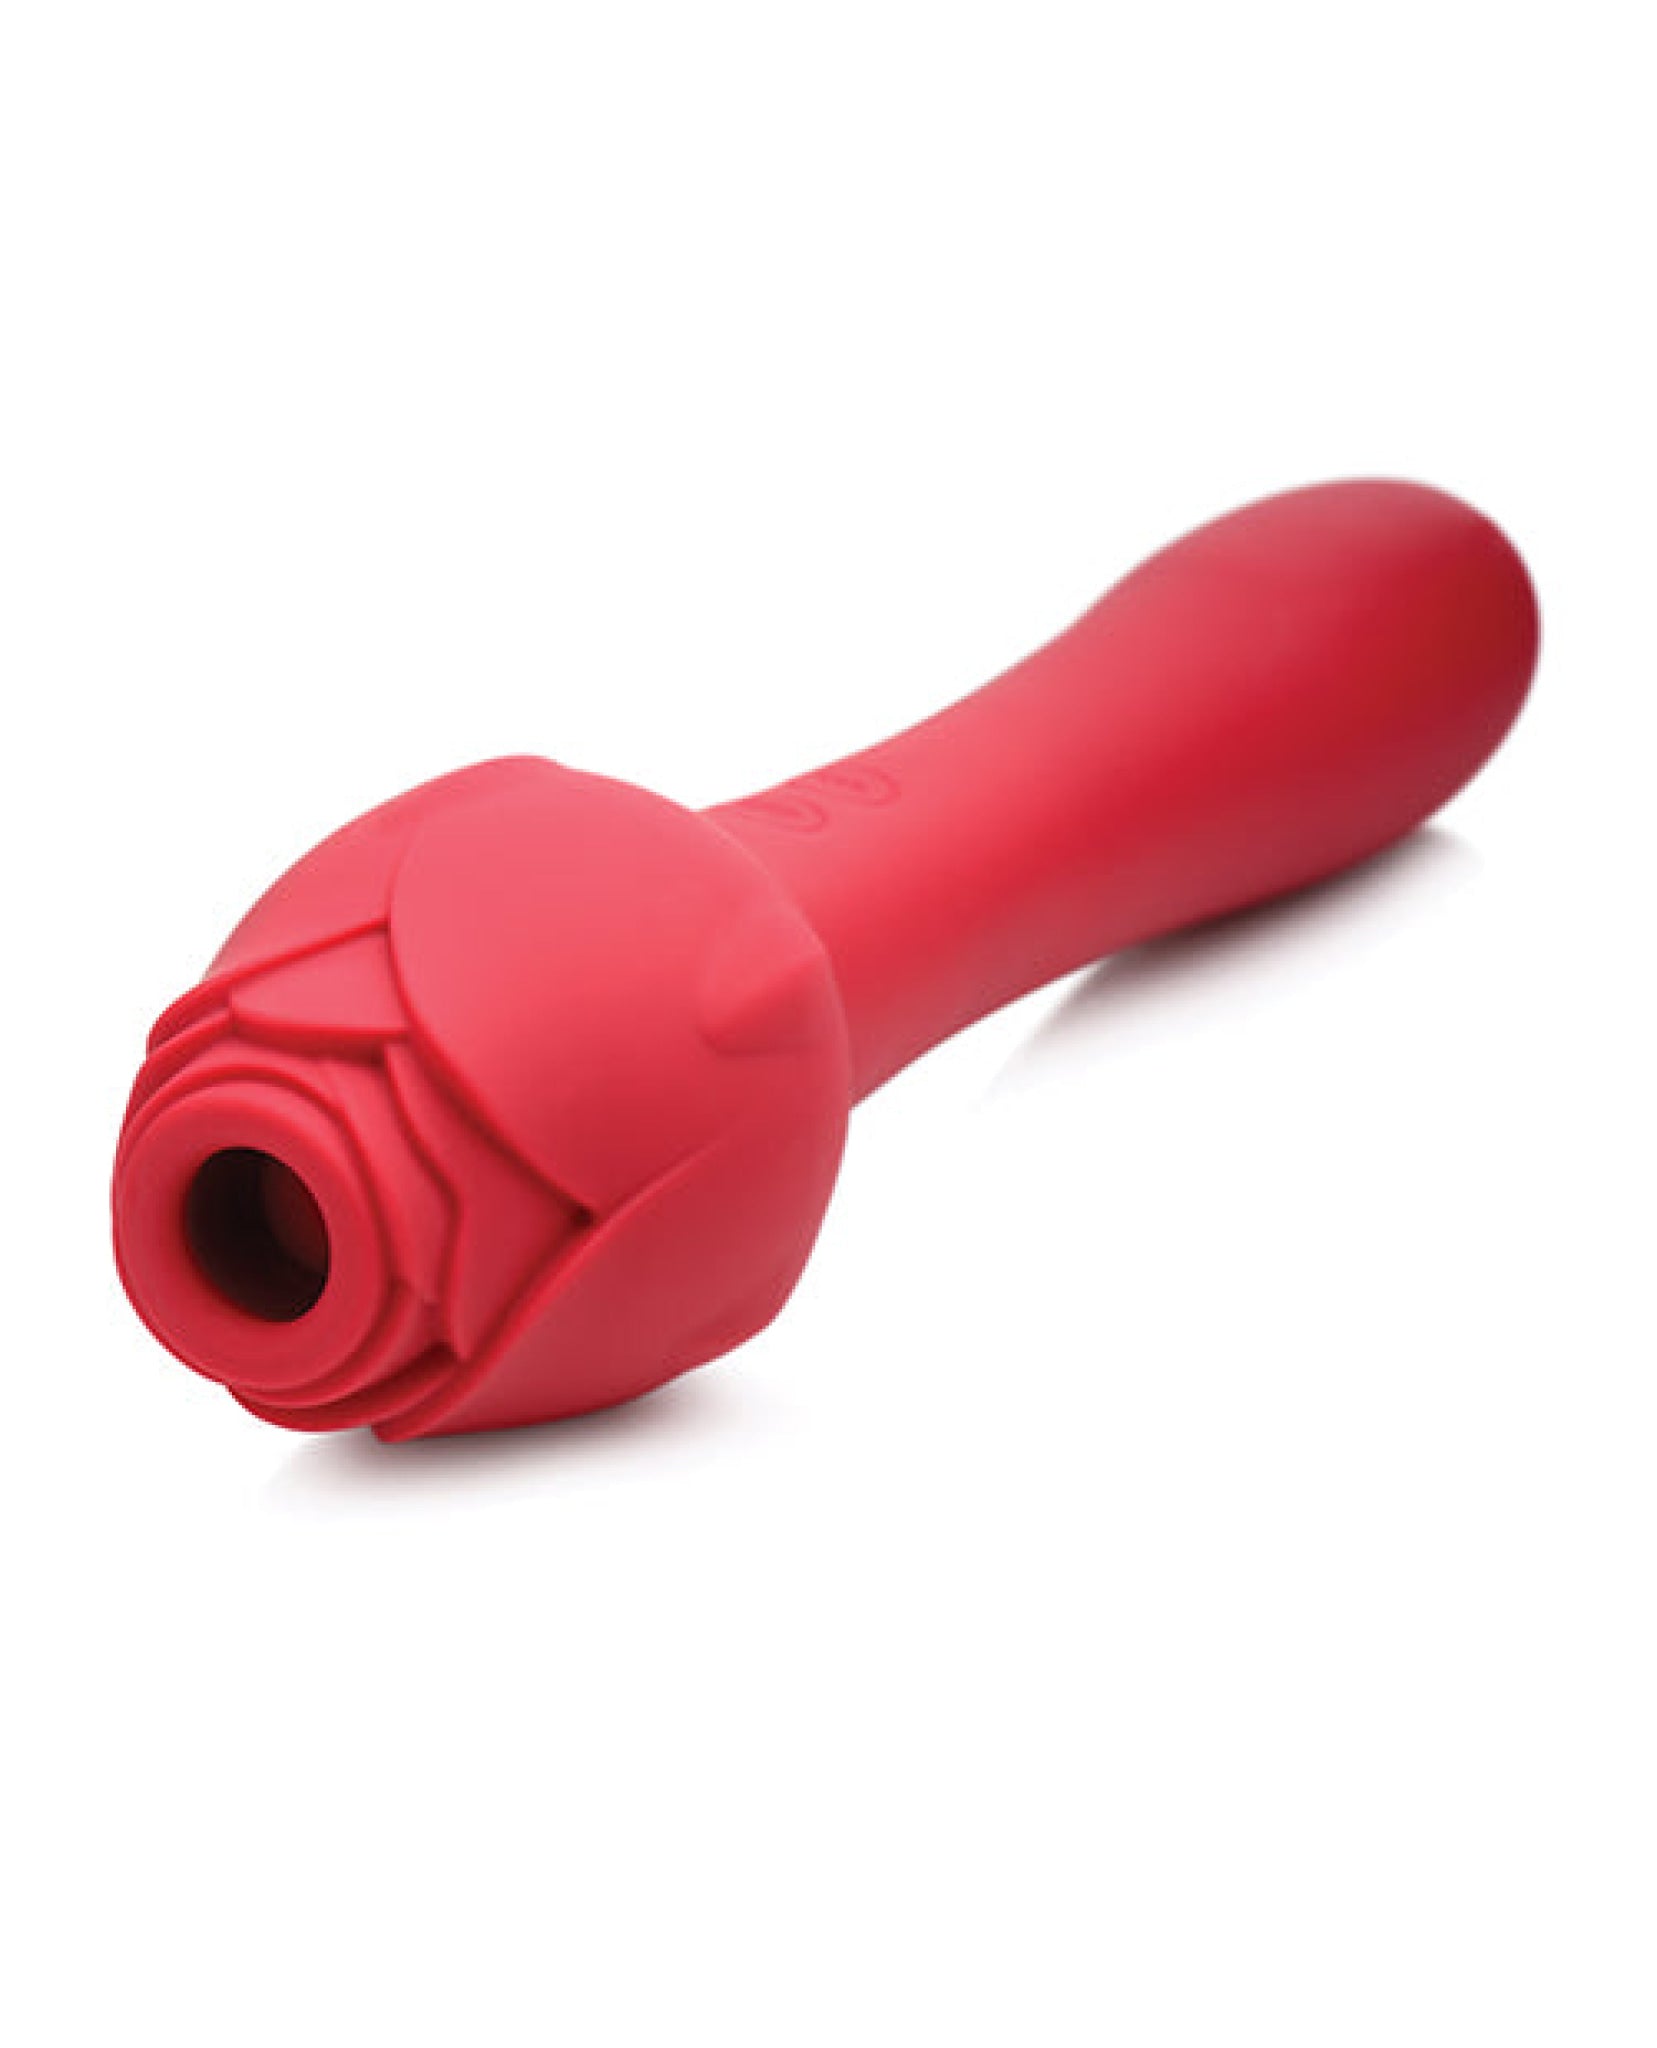 Inmi Bloomgasm Sweet Heart Rose 5x Suction Rose & 10x Vibrator - Red Inmi